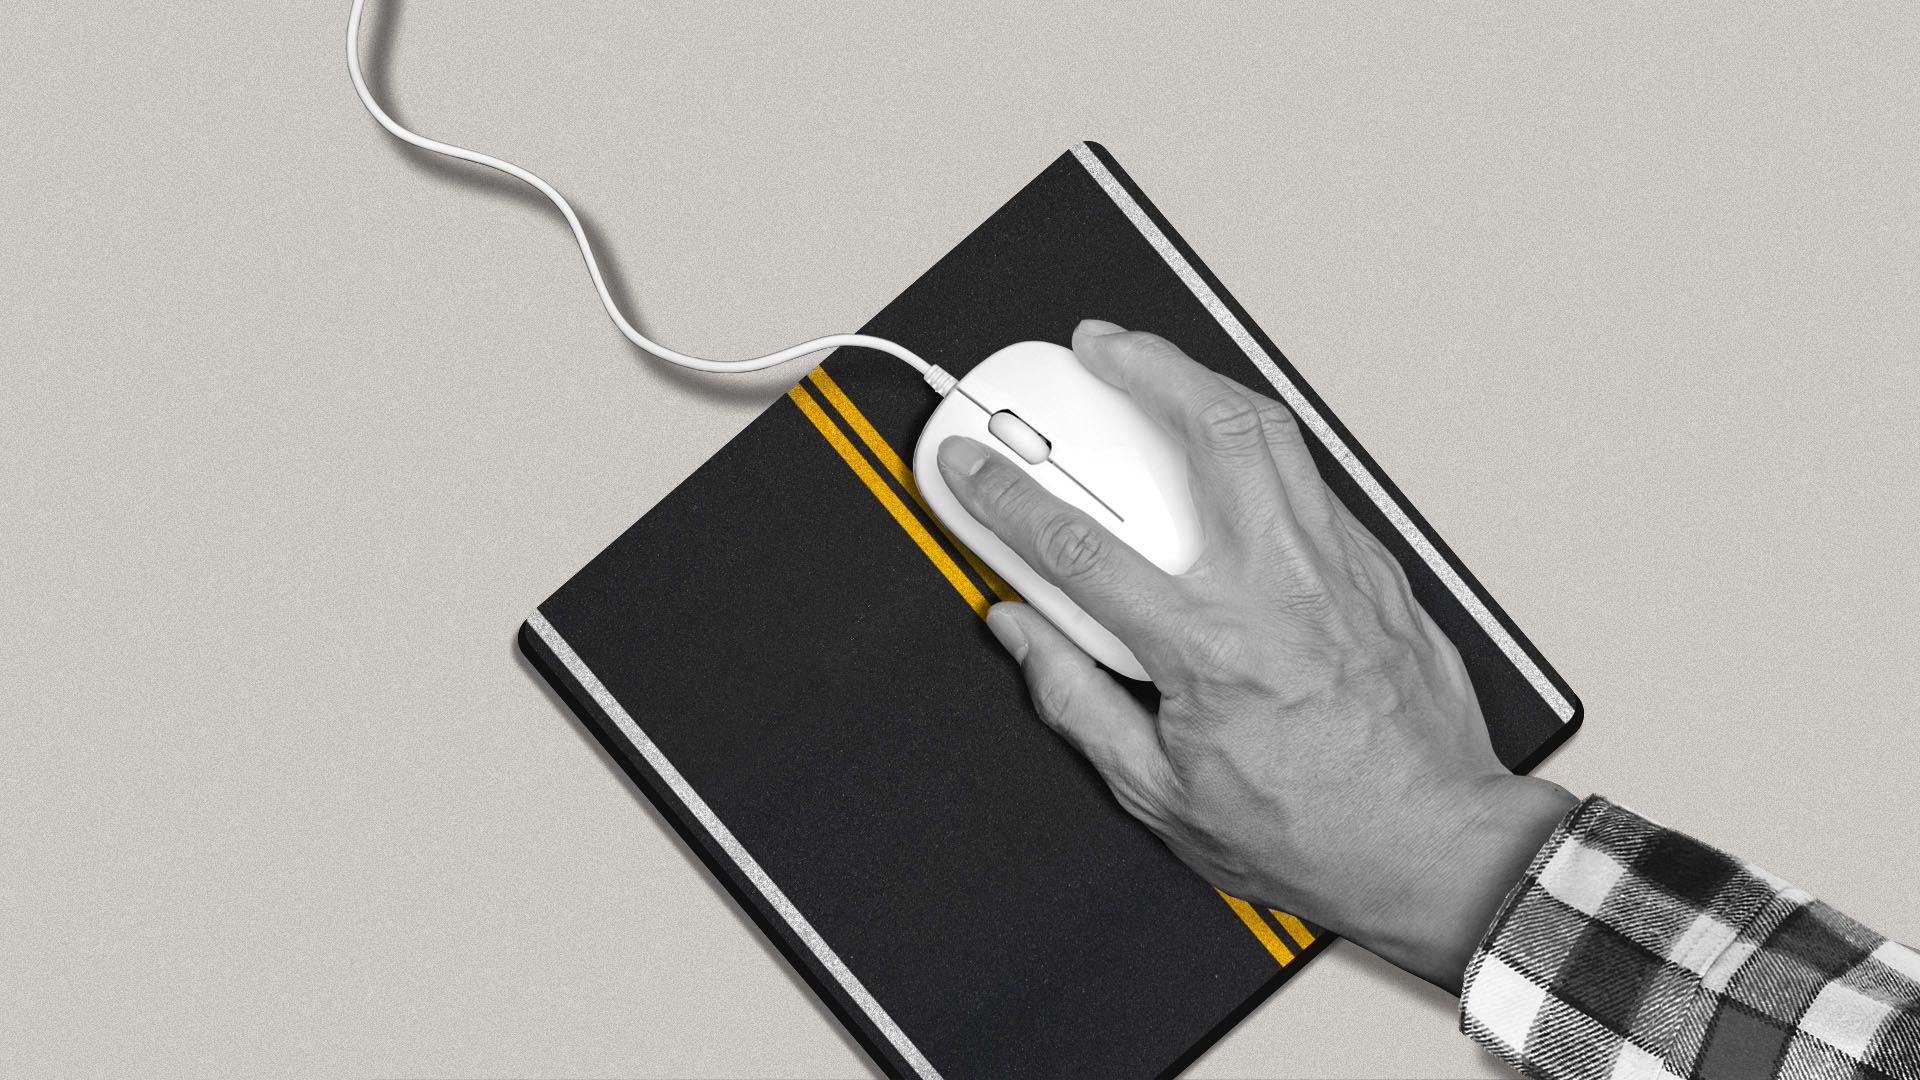 Illustration of a hand guiding a computer mouse on a highway-themed mouse pad